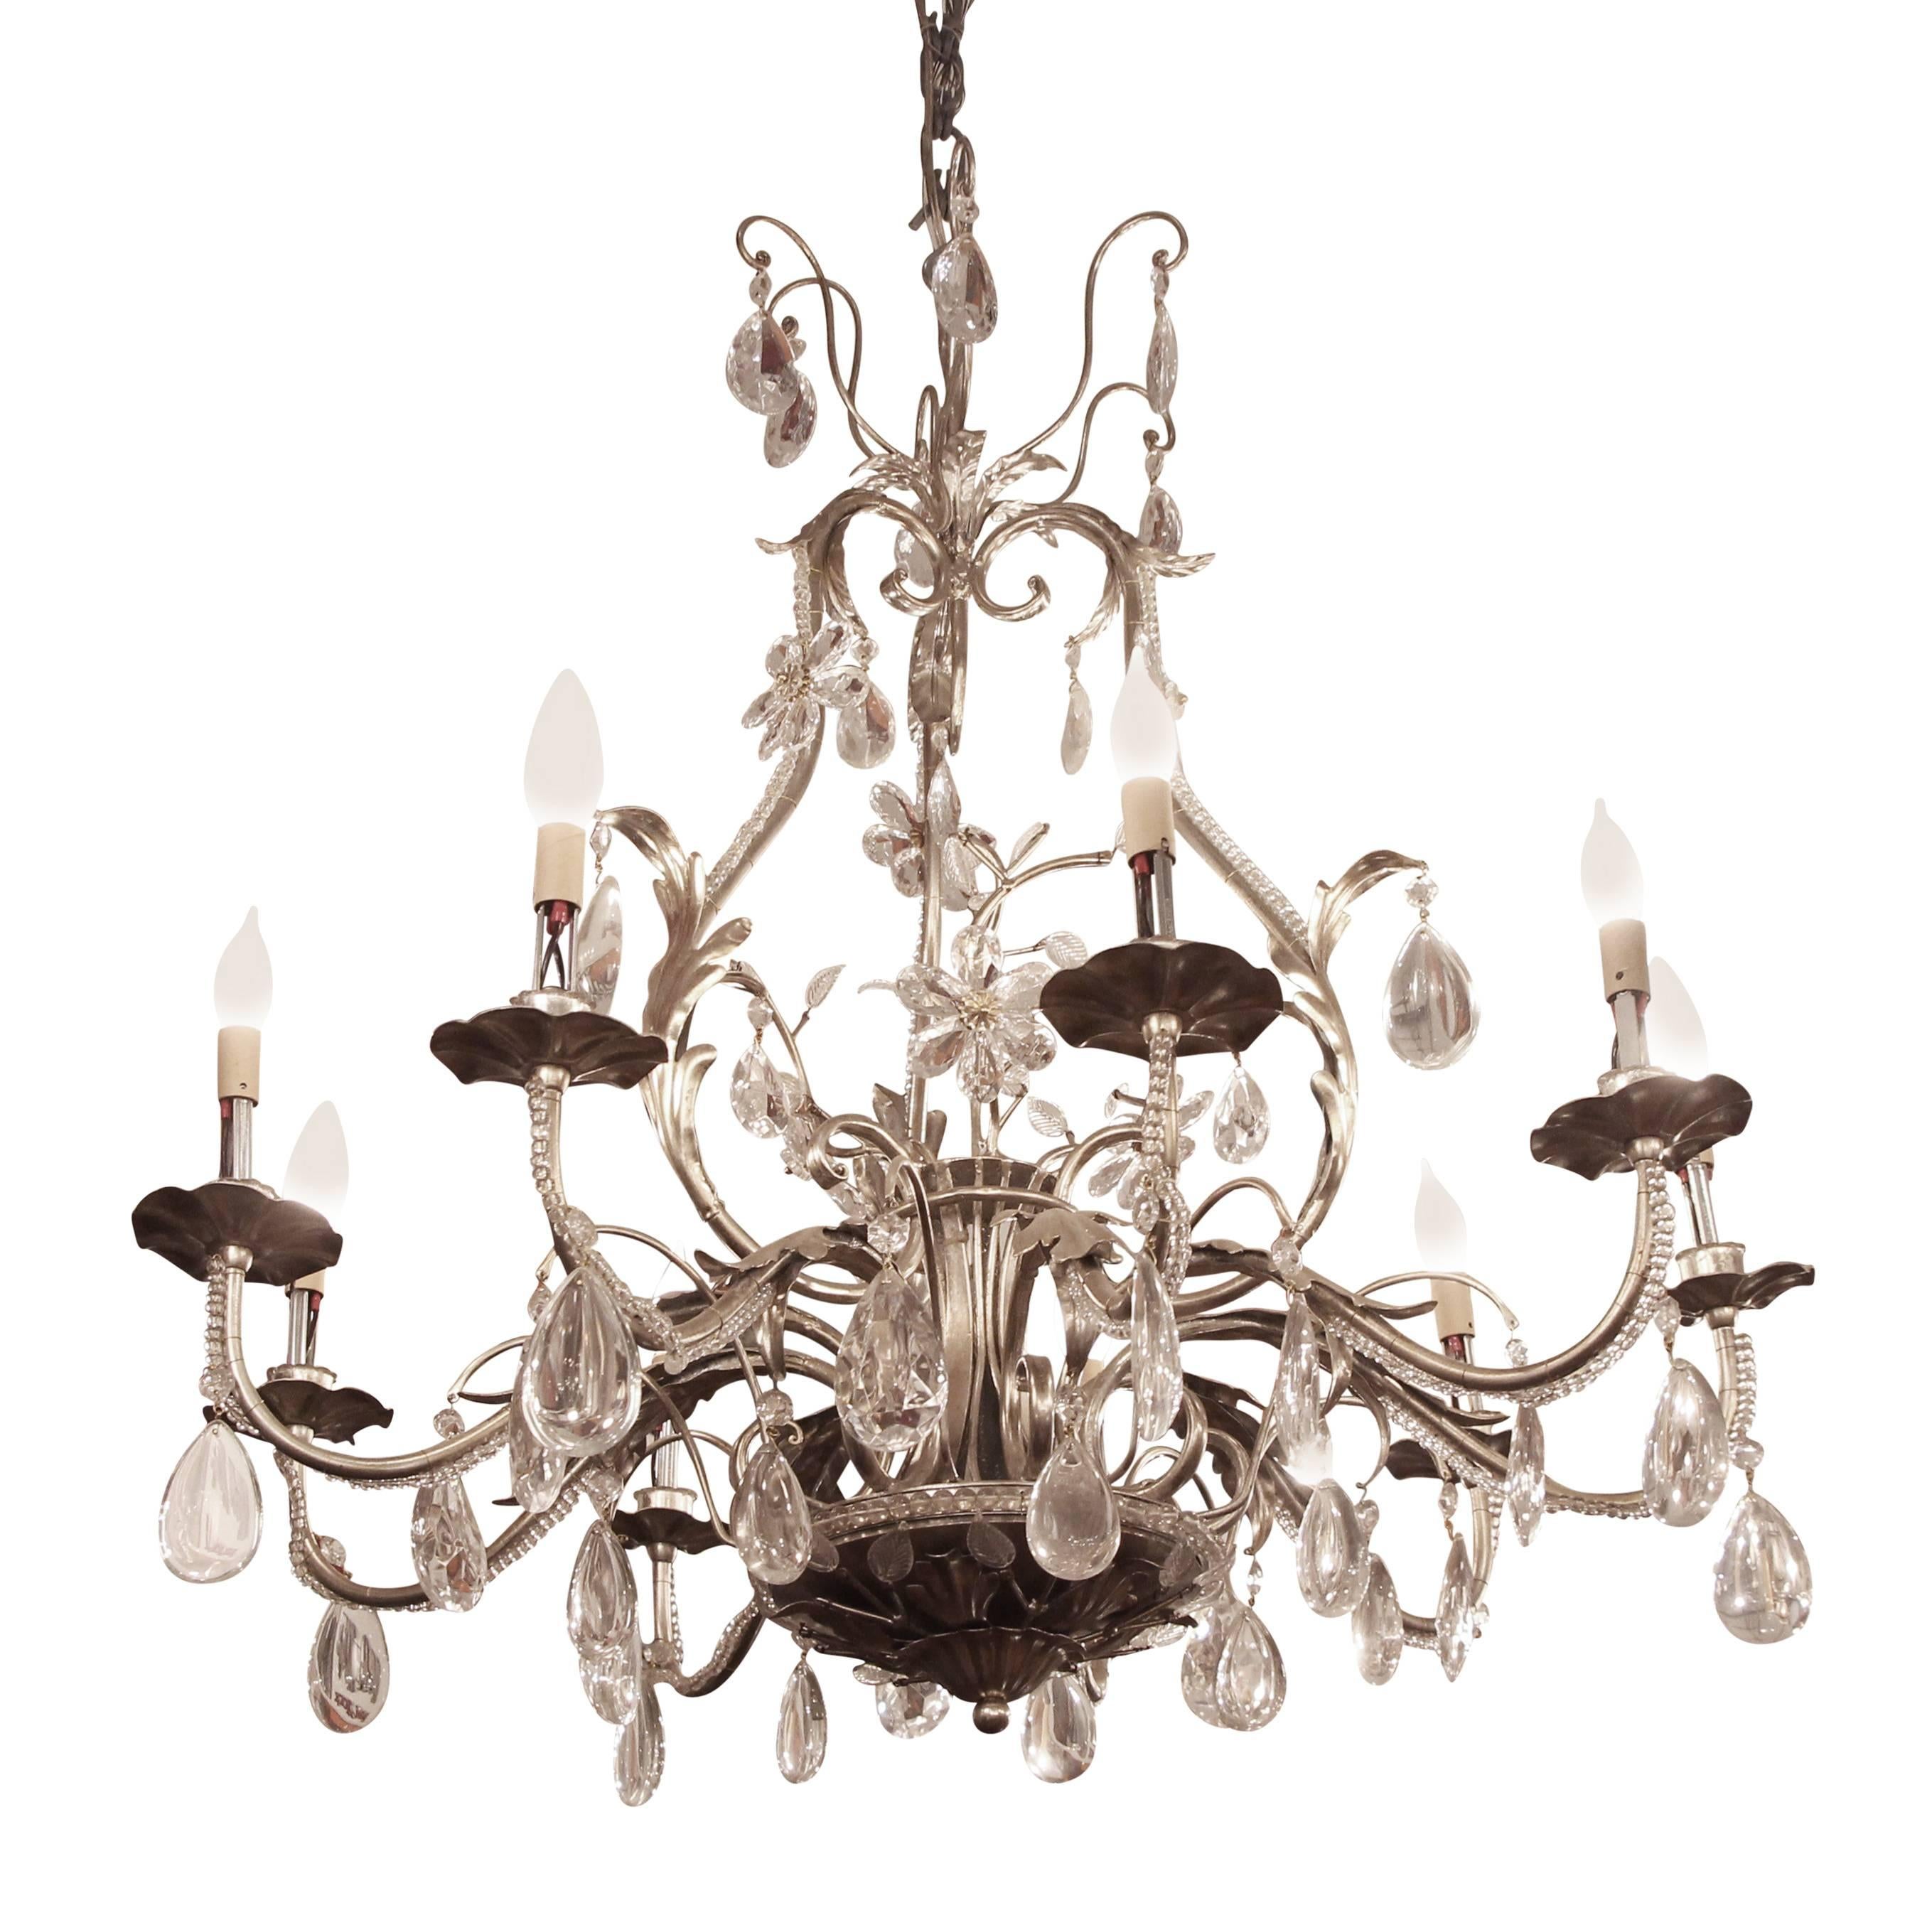 2005 Florentine style nine-arm steel chandelier with central branch motif, crystal leaves throughout and crystal drops. This can be seen at our 2420 Broadway location on the upper west side in Manhattan.